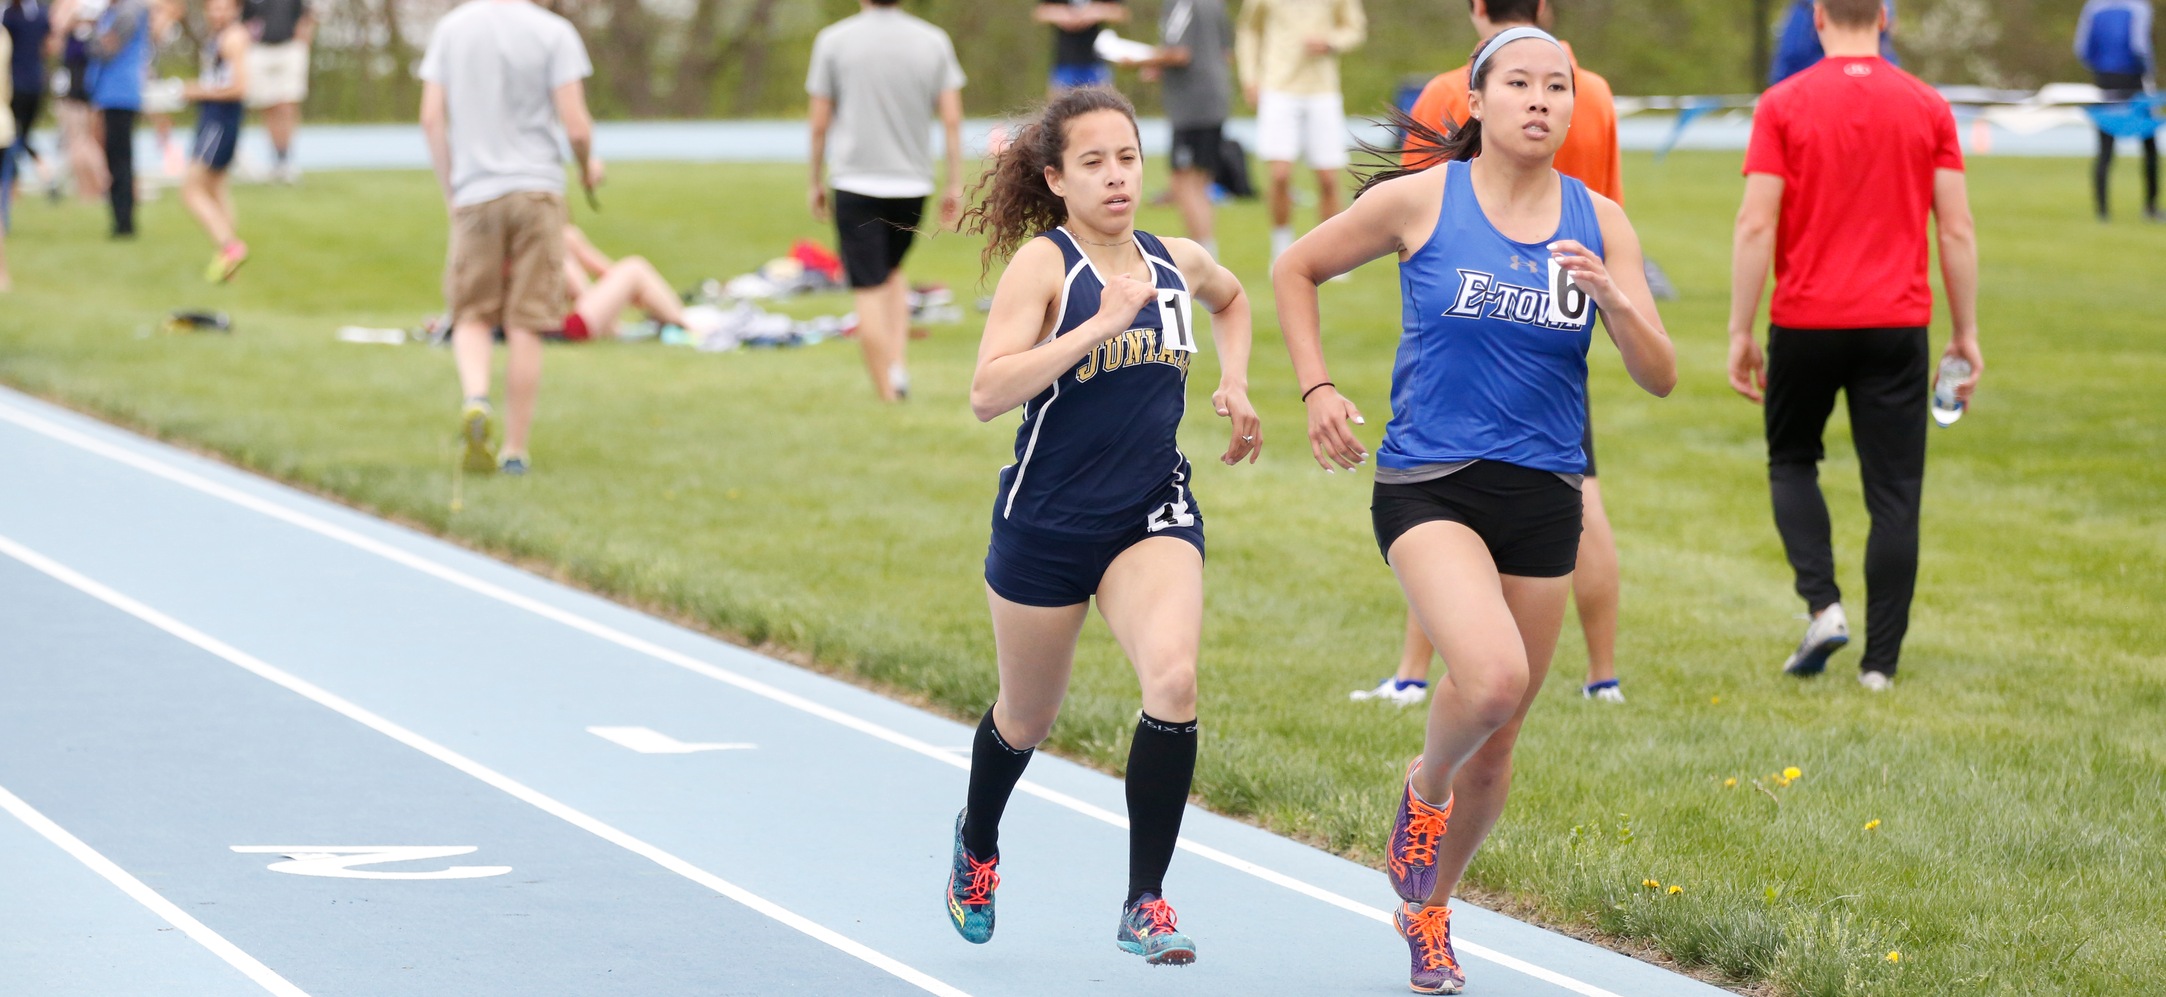 Women's Track & Field Competes at Swarthmore Last Chance Meet